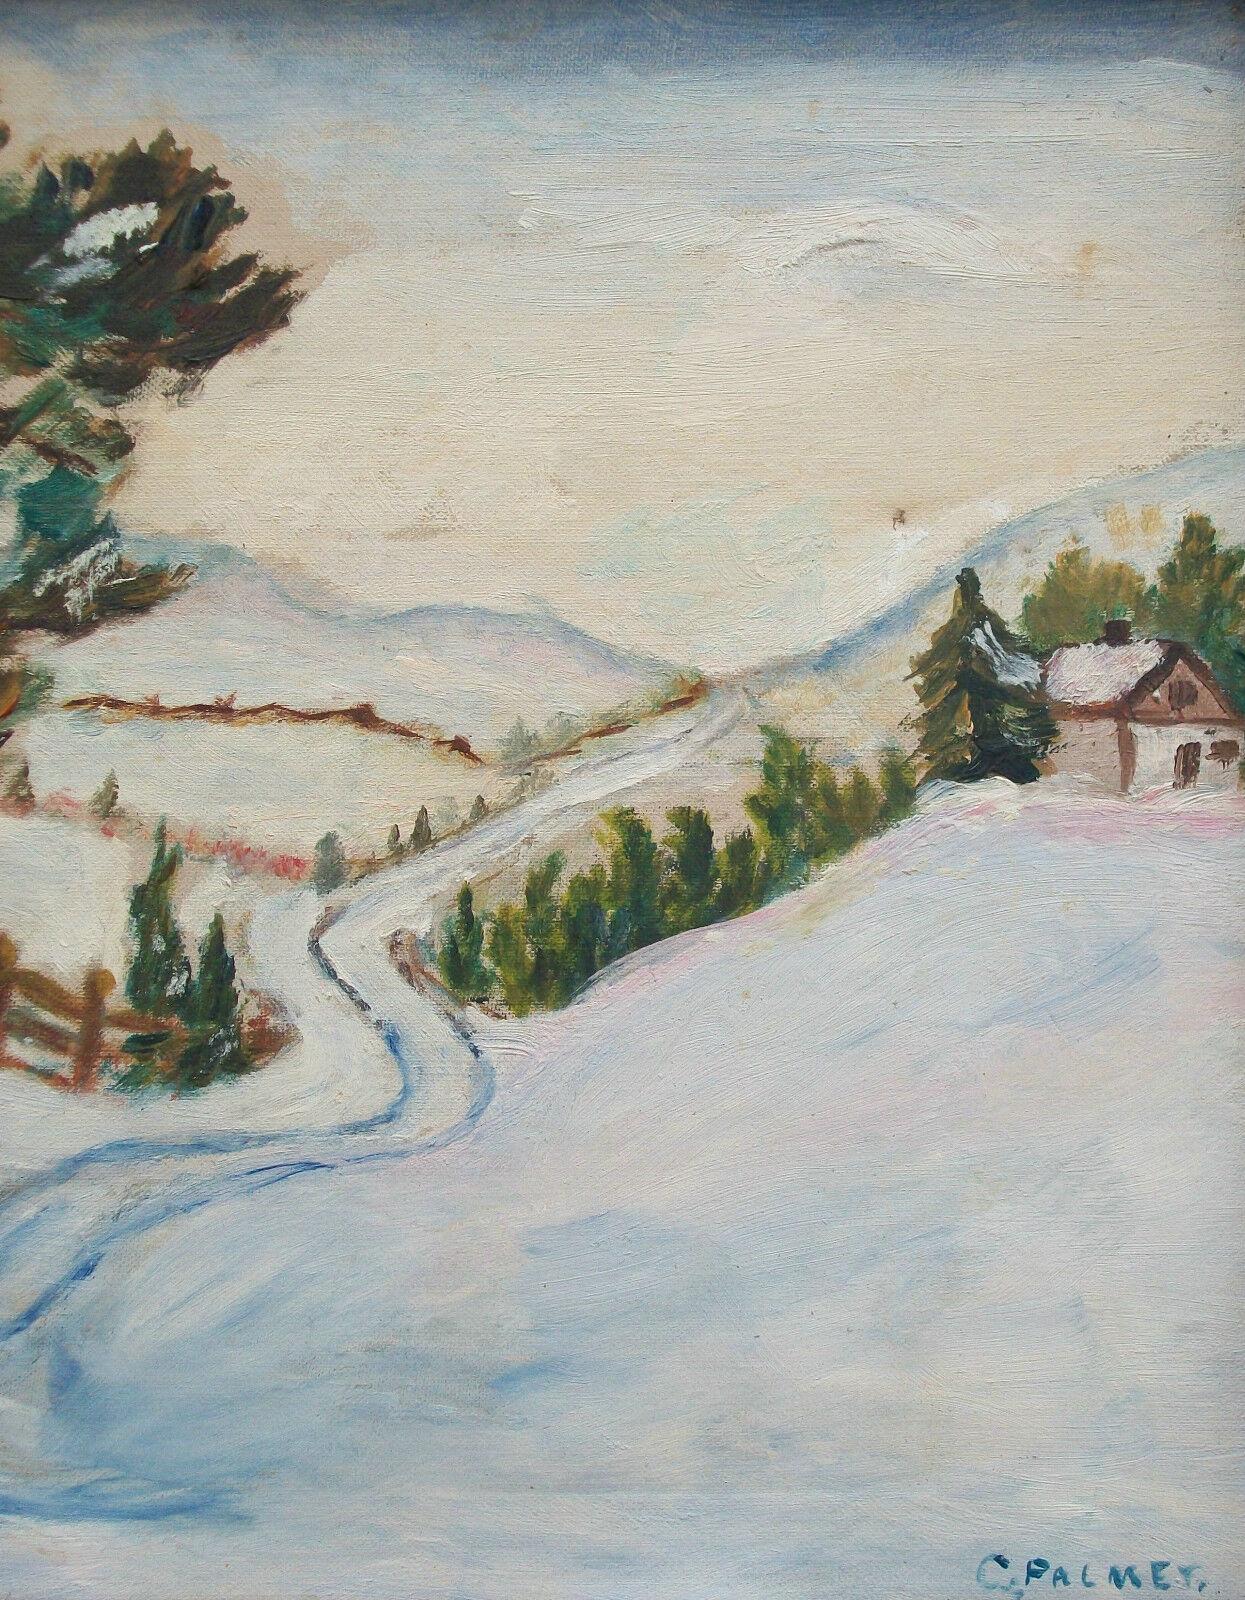 Country C PALMER - Impressionist Style Winter Landscape Painting - Canada - Early 20th C For Sale